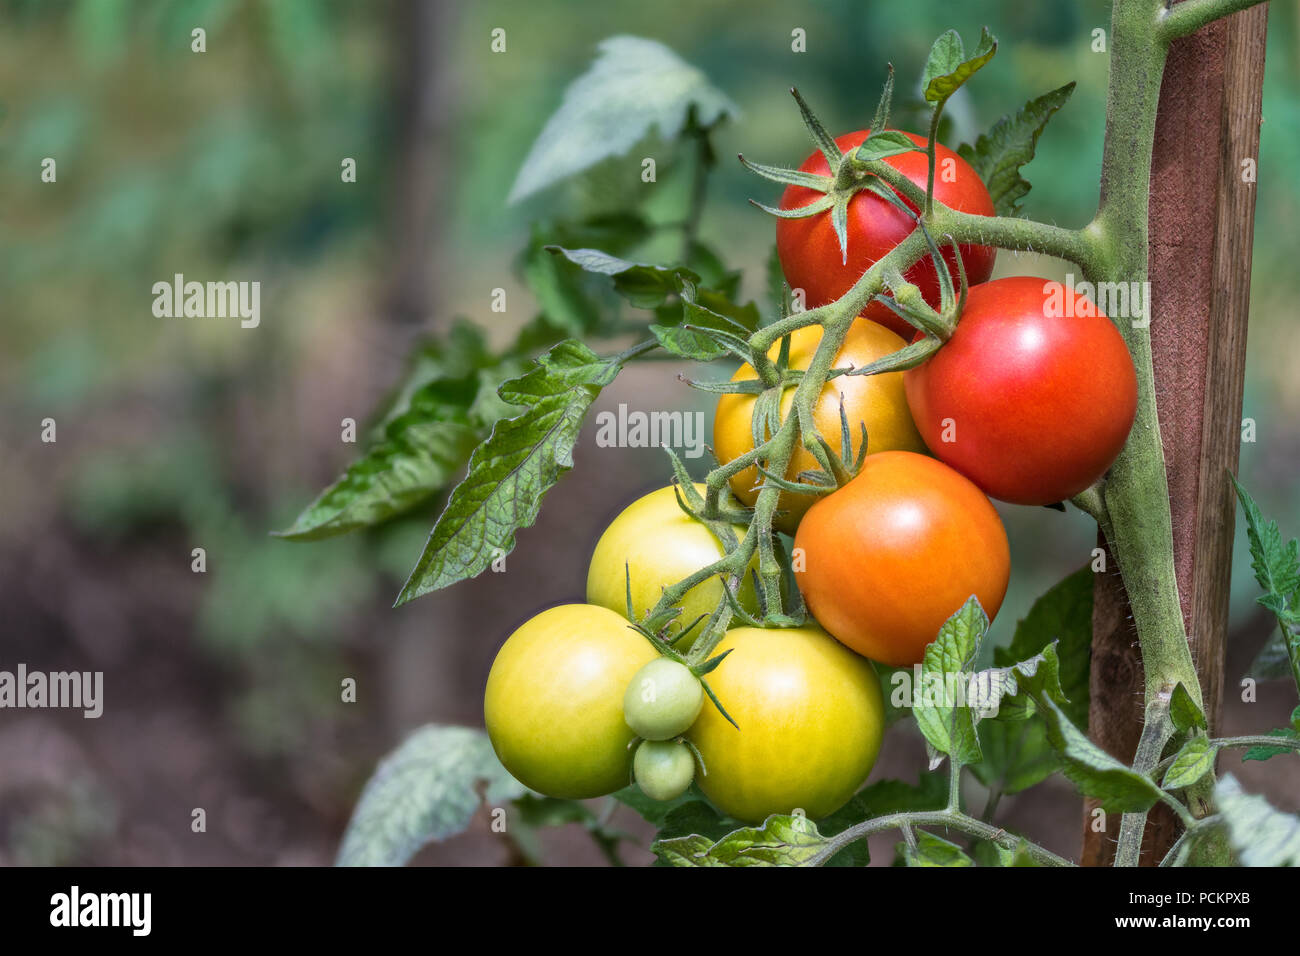 Bunch of red tomatoes at different phases of ripening. Solanum lycopersicum. Ripe and unripe growing tomato berries close-up. Green bio plant, garden. Stock Photo